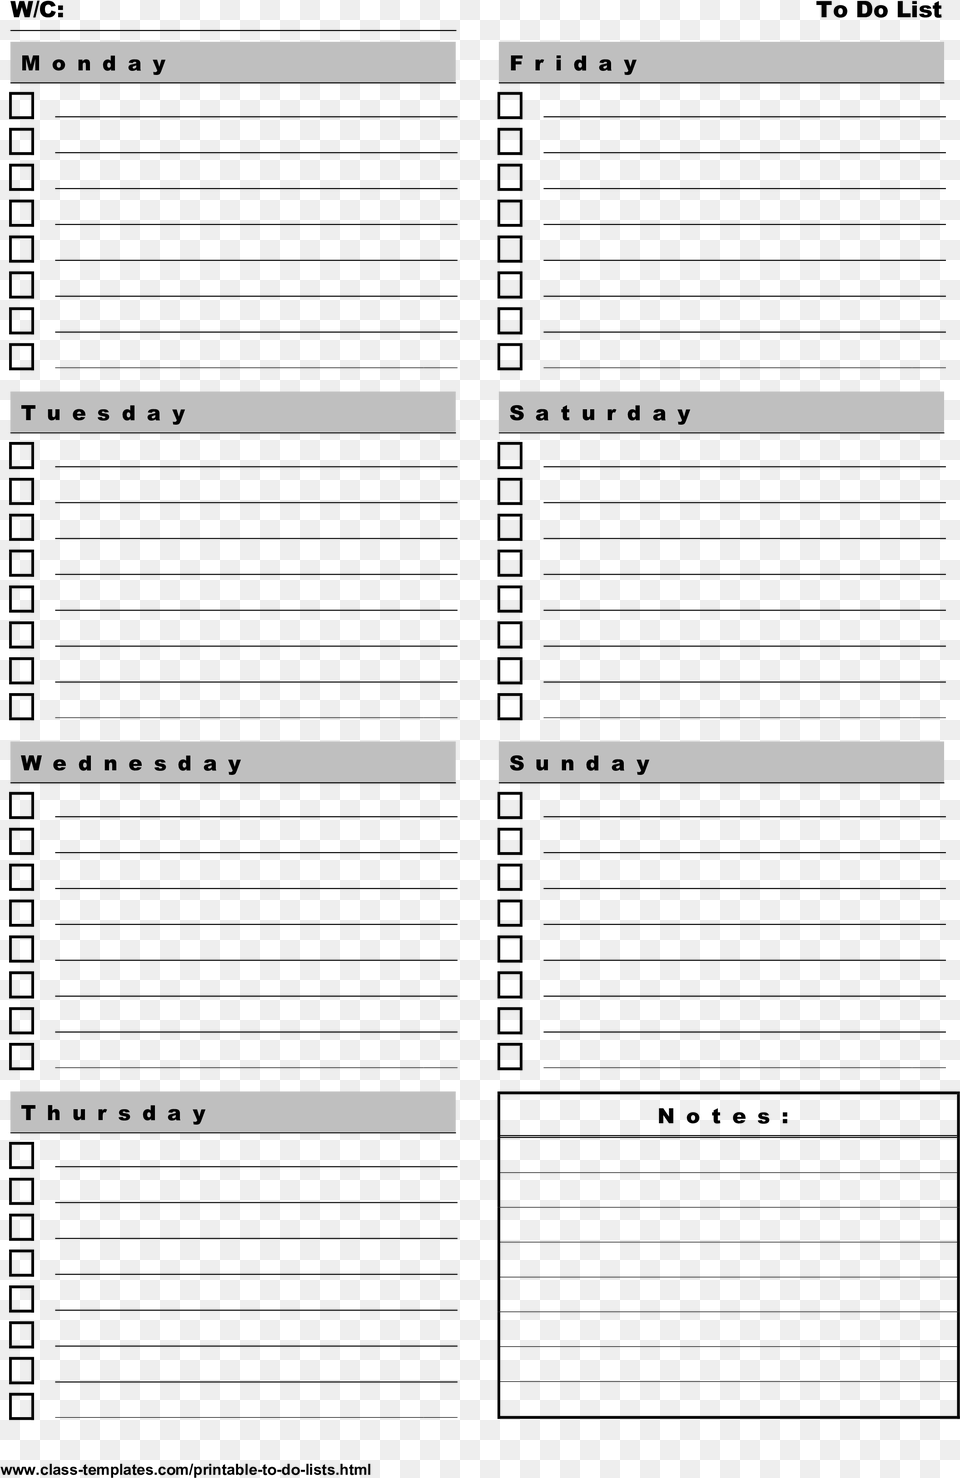 Printable To Do List 7 Days A Week Portrait Main Image Printable 7 Day Weekly Planner Template, Page, Text Free Png Download